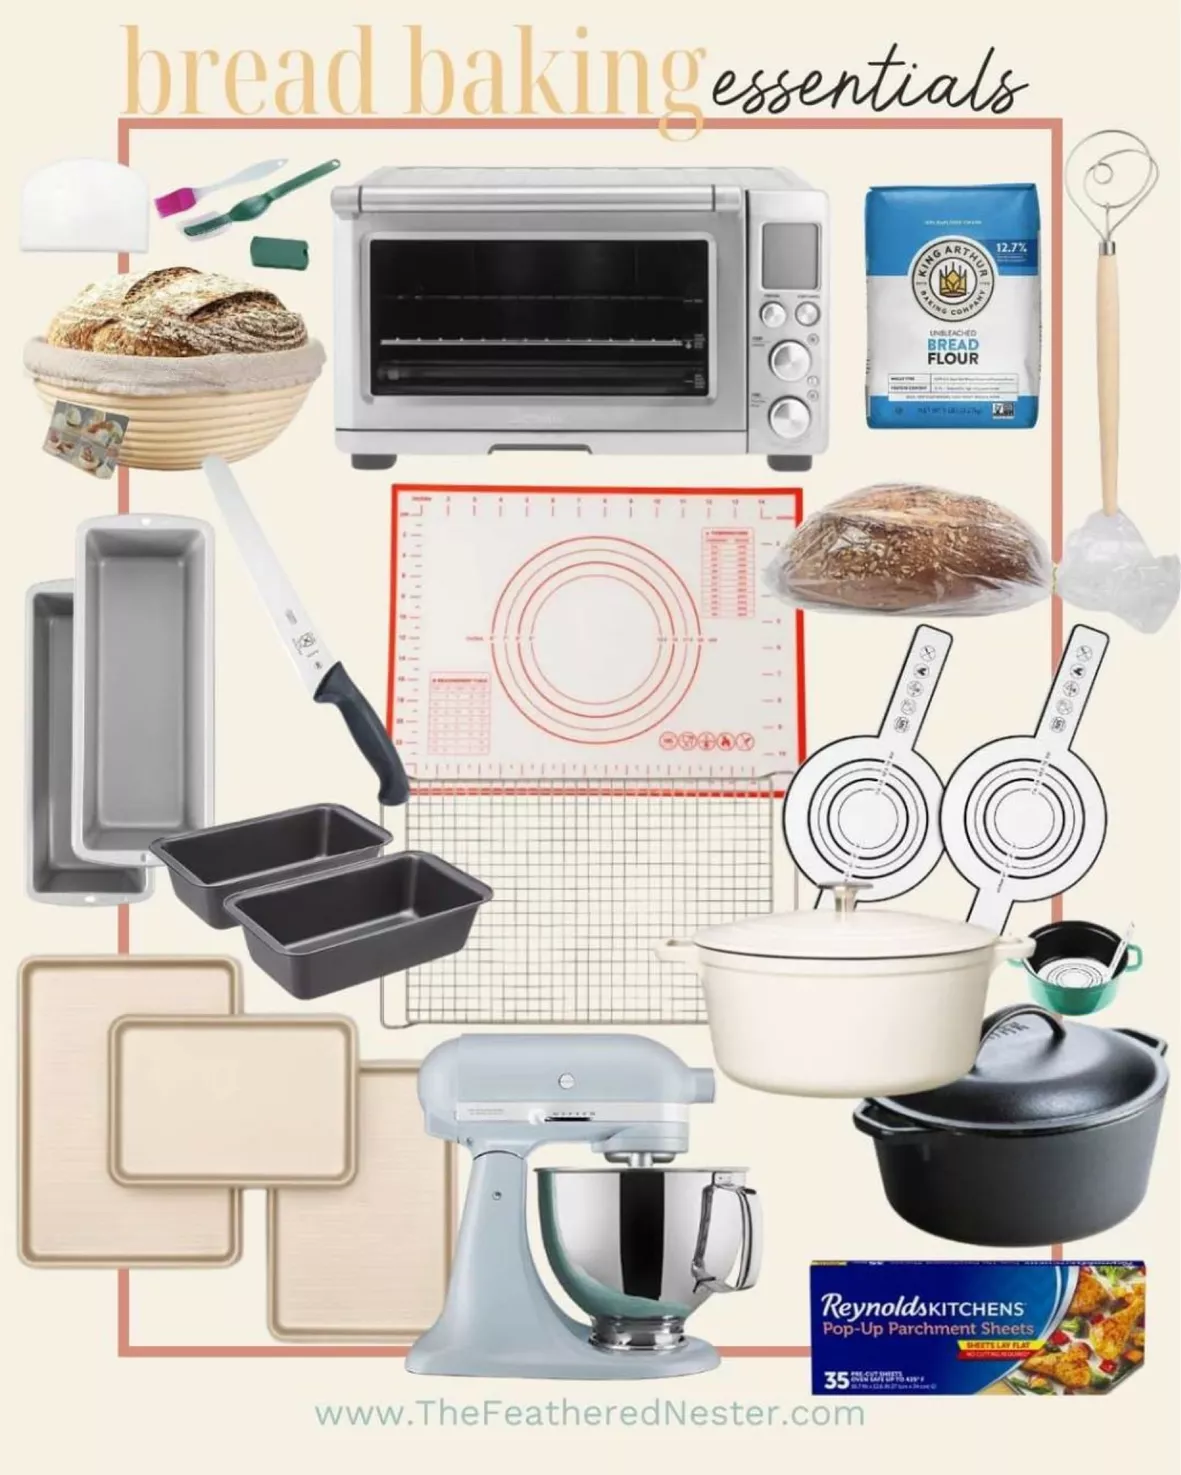 5 Kitchen Essentials for Your Home